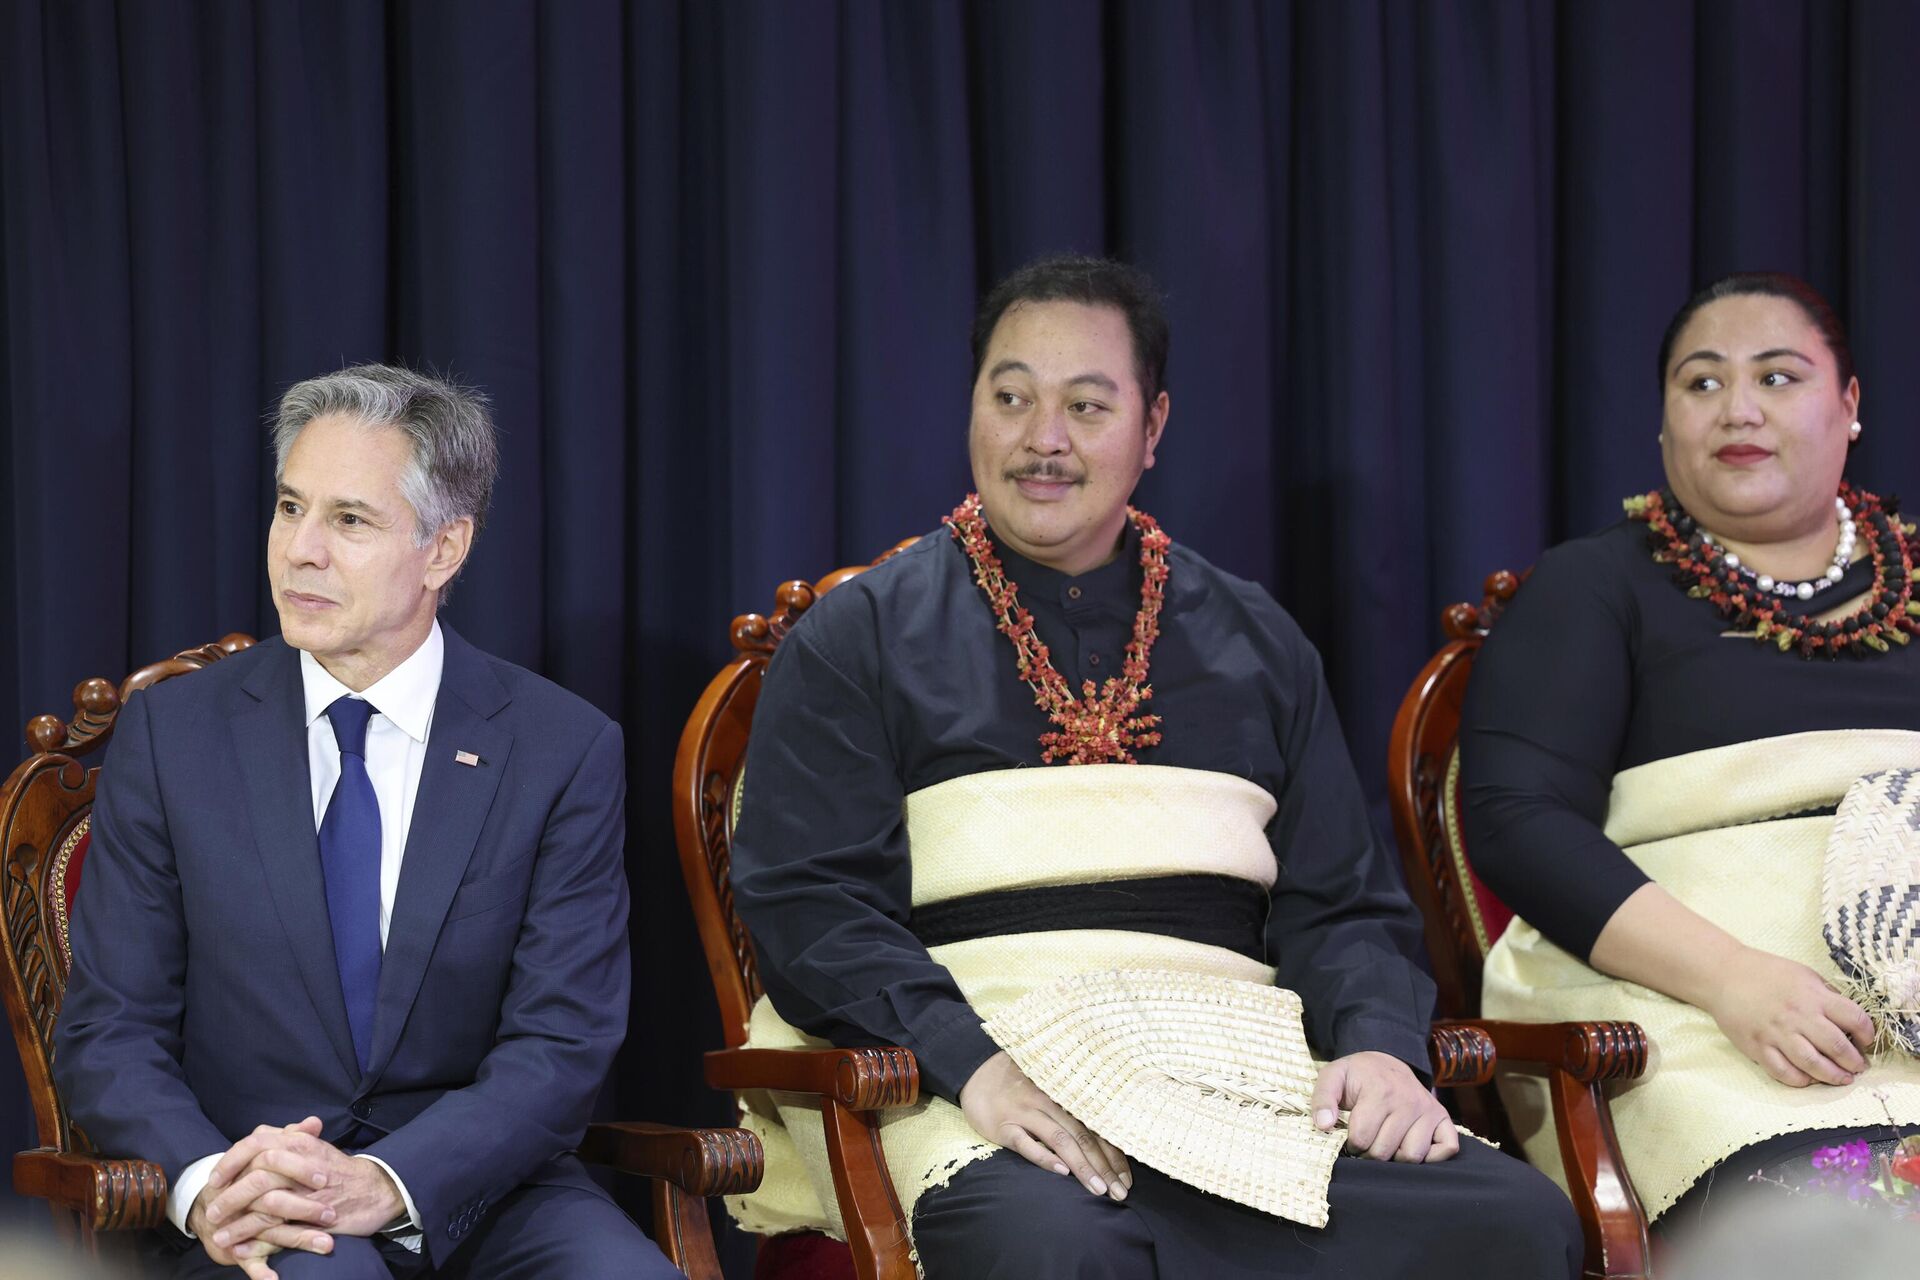 From left, U.S. Secretary of State Antony Blinken, Tonga's Crown Prince Tupouto'a 'Ulukalala and Crown Princess Sinaitakala attend the dedication of the new U.S. Embassy in Nuku'alofa, Tonga Wednesday, July 26, 2023. Blinken visited the tiny kingdom of Tonga on Wednesday, as the United States continues to increase its diplomatic efforts in the Pacific while China's influence in the region grows. - Sputnik International, 1920, 26.12.2023